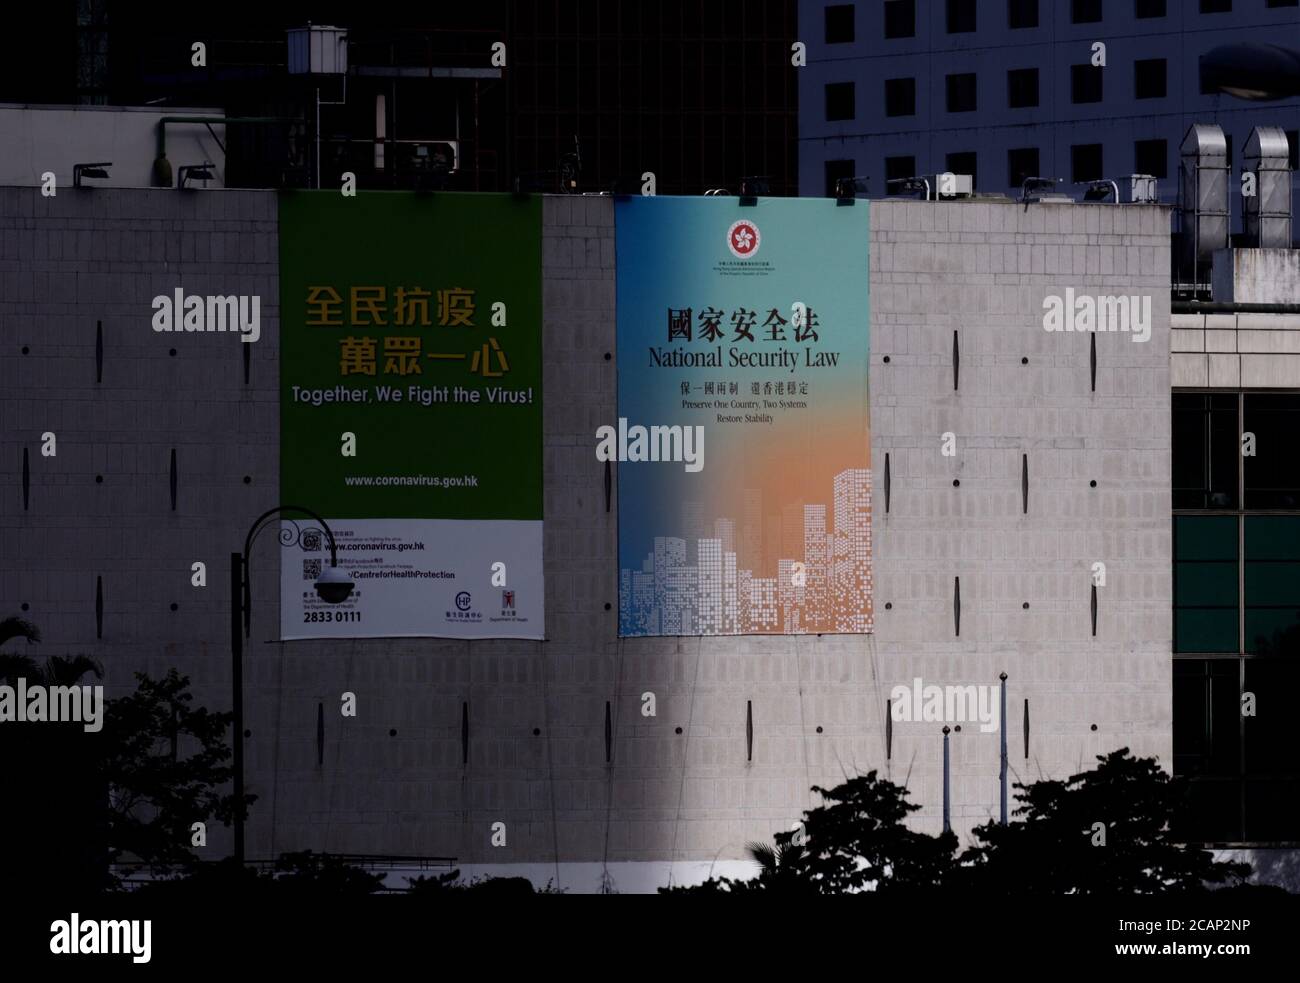 Hong Kong, CHINA. 7th Aug, 2020. View of political slogan advertising 'merits' of imposing HK NATIONAL SECURITY LAW is displayed on the outer wall of City Hall in the heart of Central, Hong Kong.Aug-7, 2020 Hong Kong.ZUMA/Liau Chung-ren Credit: Liau Chung-ren/ZUMA Wire/Alamy Live News Stock Photo